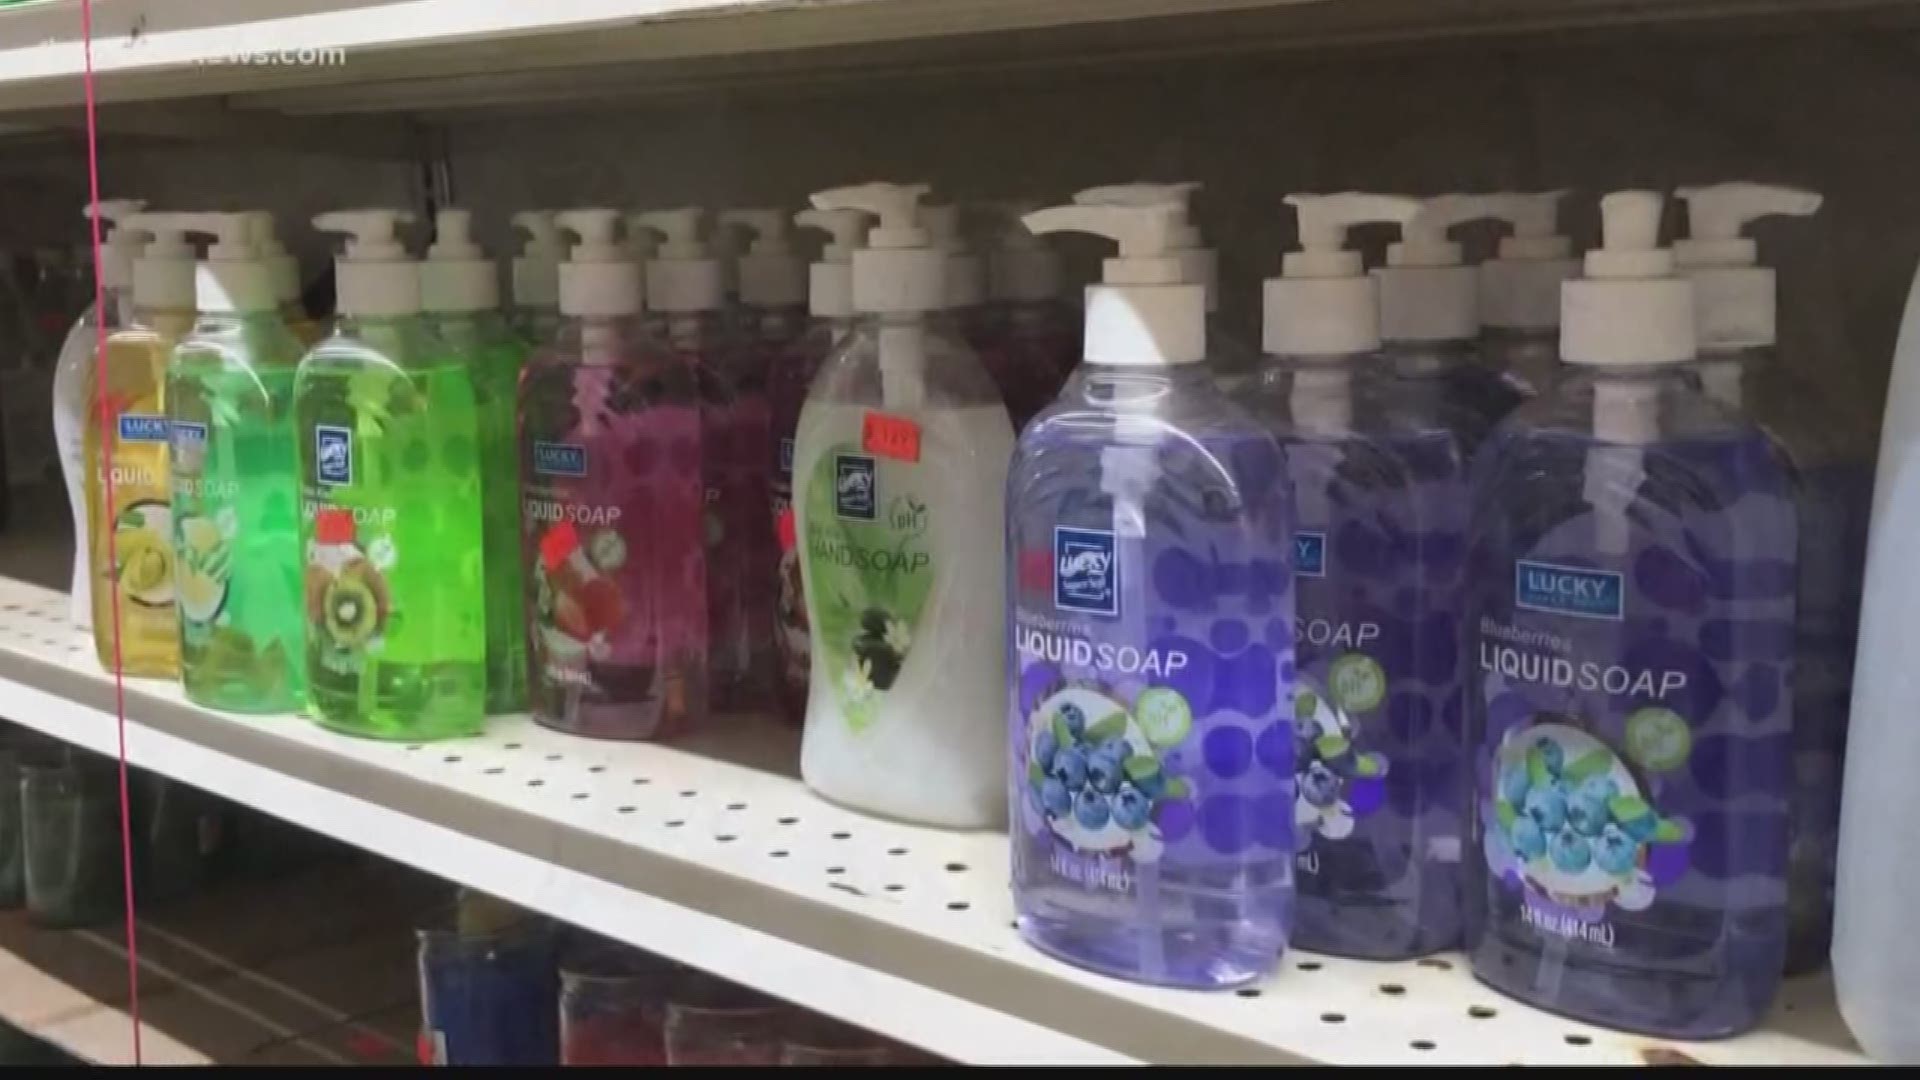 Some people report hand sanitizer prices surging into the $60s.